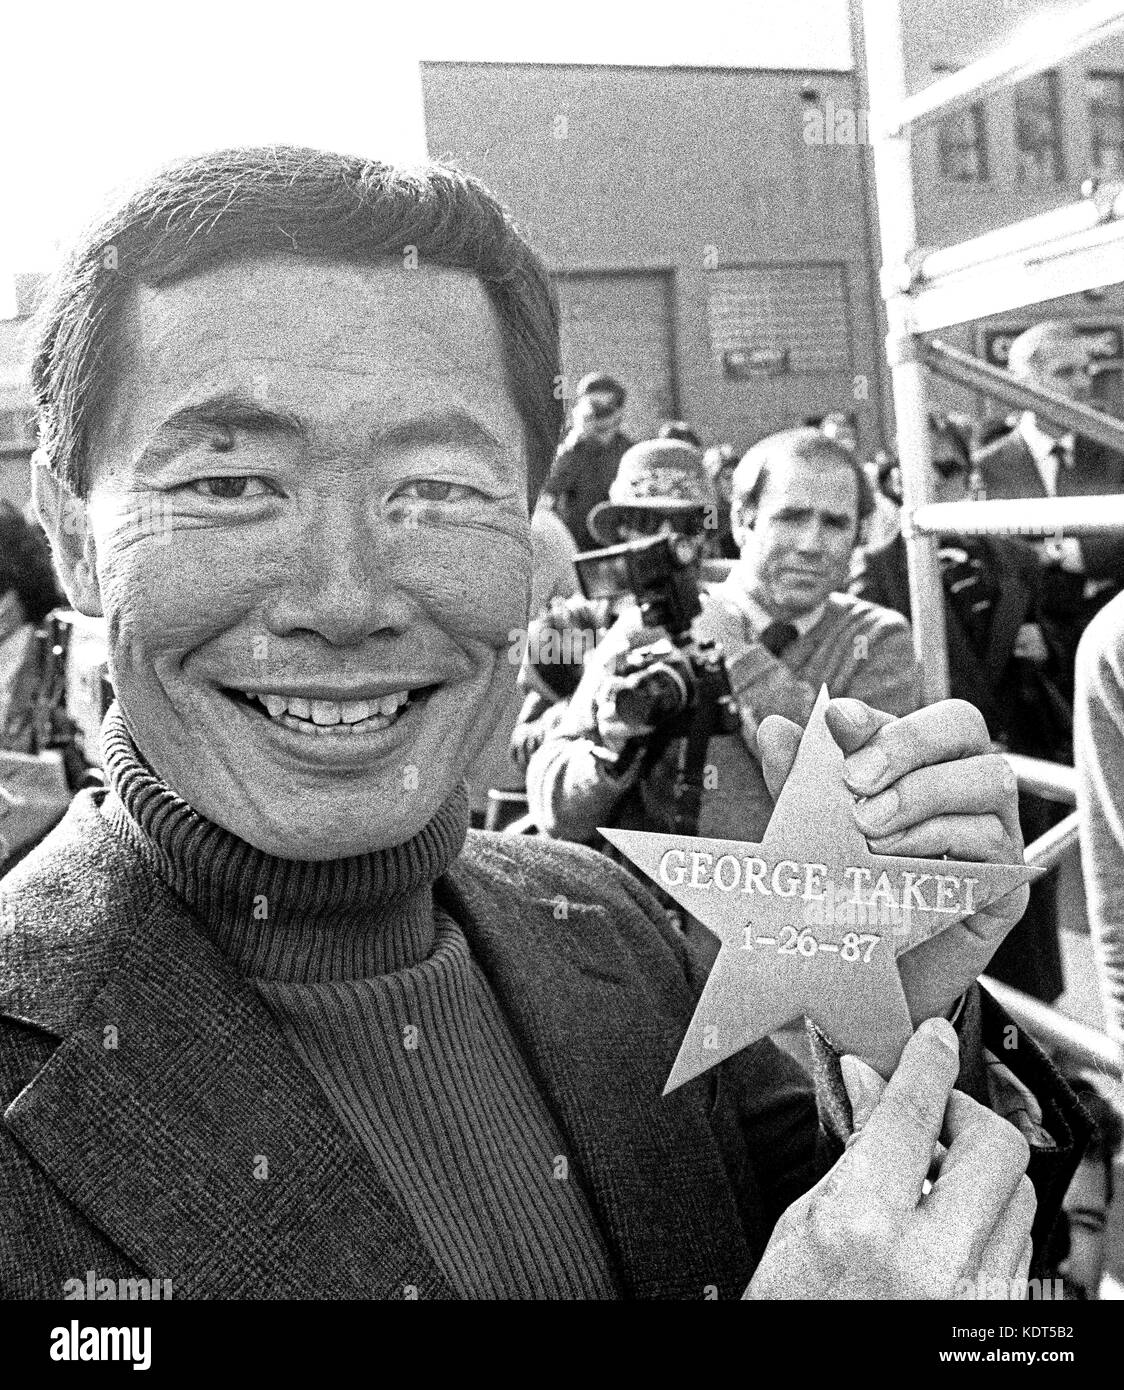 George Takei with his star he places in a San Francisco sidewalk. 1/26/1987 Stock Photo